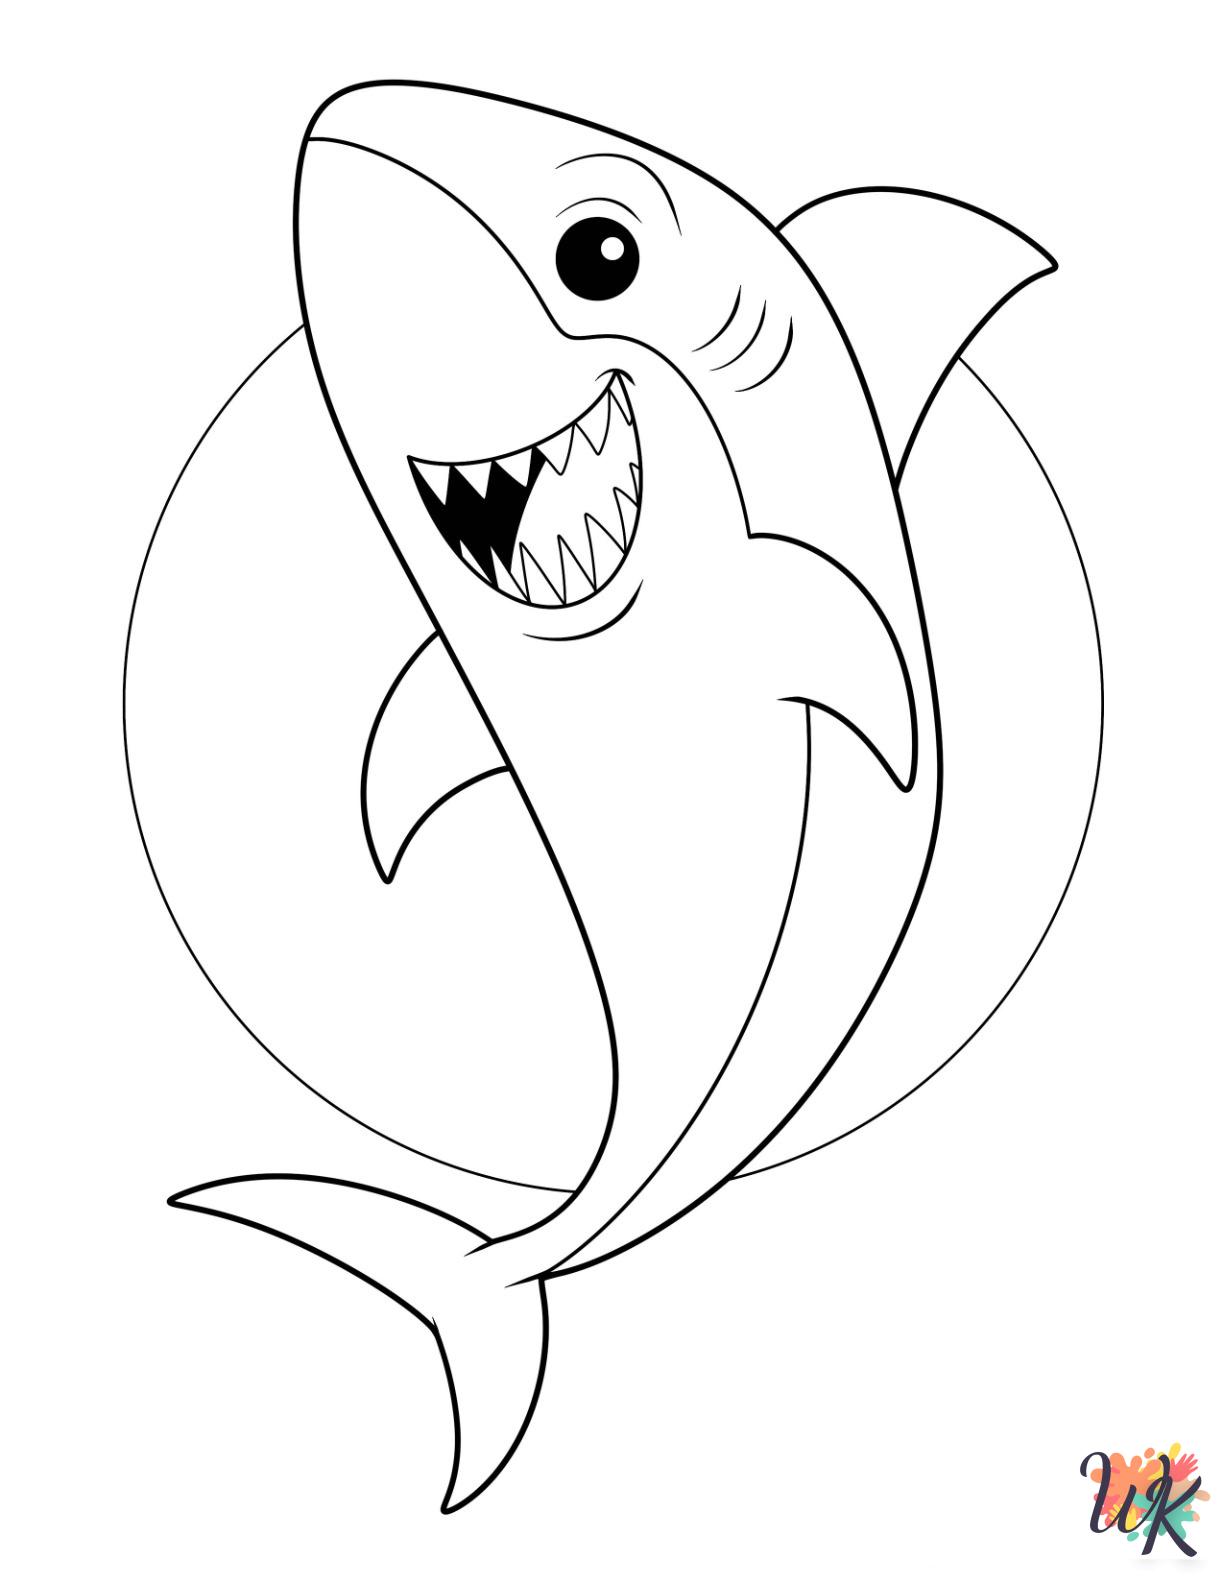 Shark coloring pages pdf